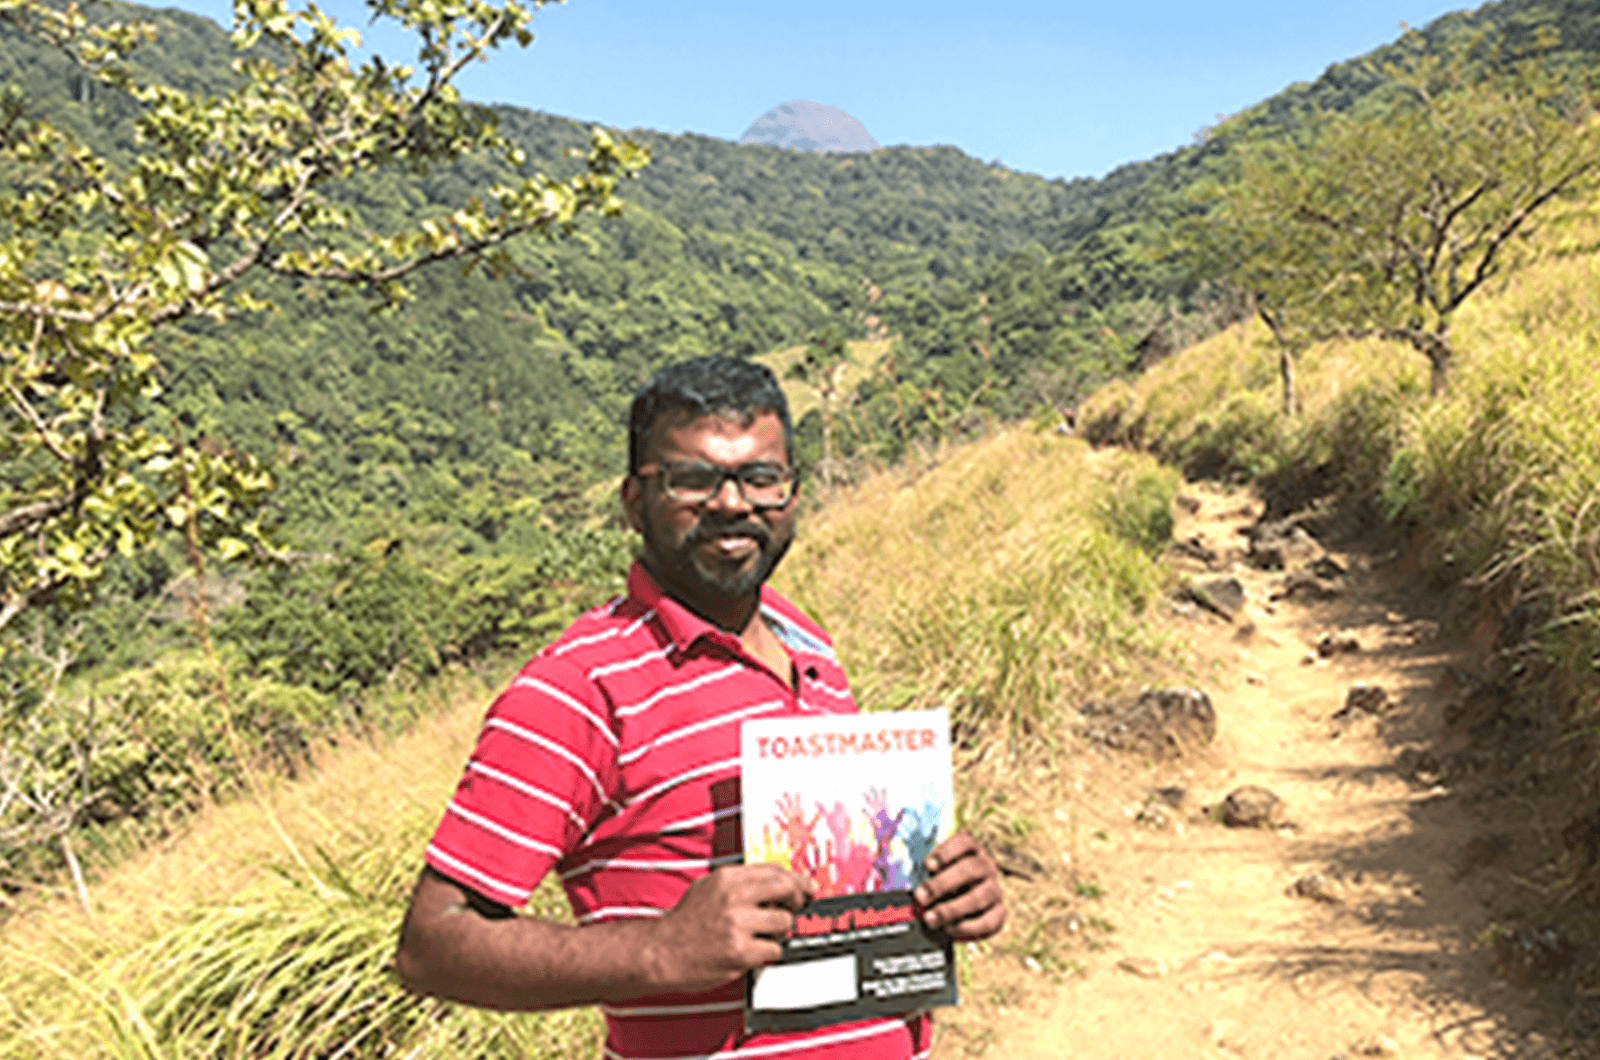 Pakshi Rajan M of Chennai, Tamil Nadu, India, treks with his magazine in the Pogthigai Hills on the border of Kerala and Tamil Nadu, India. The area is said to be where the sage Agastya created the grammar for the Tamil language.